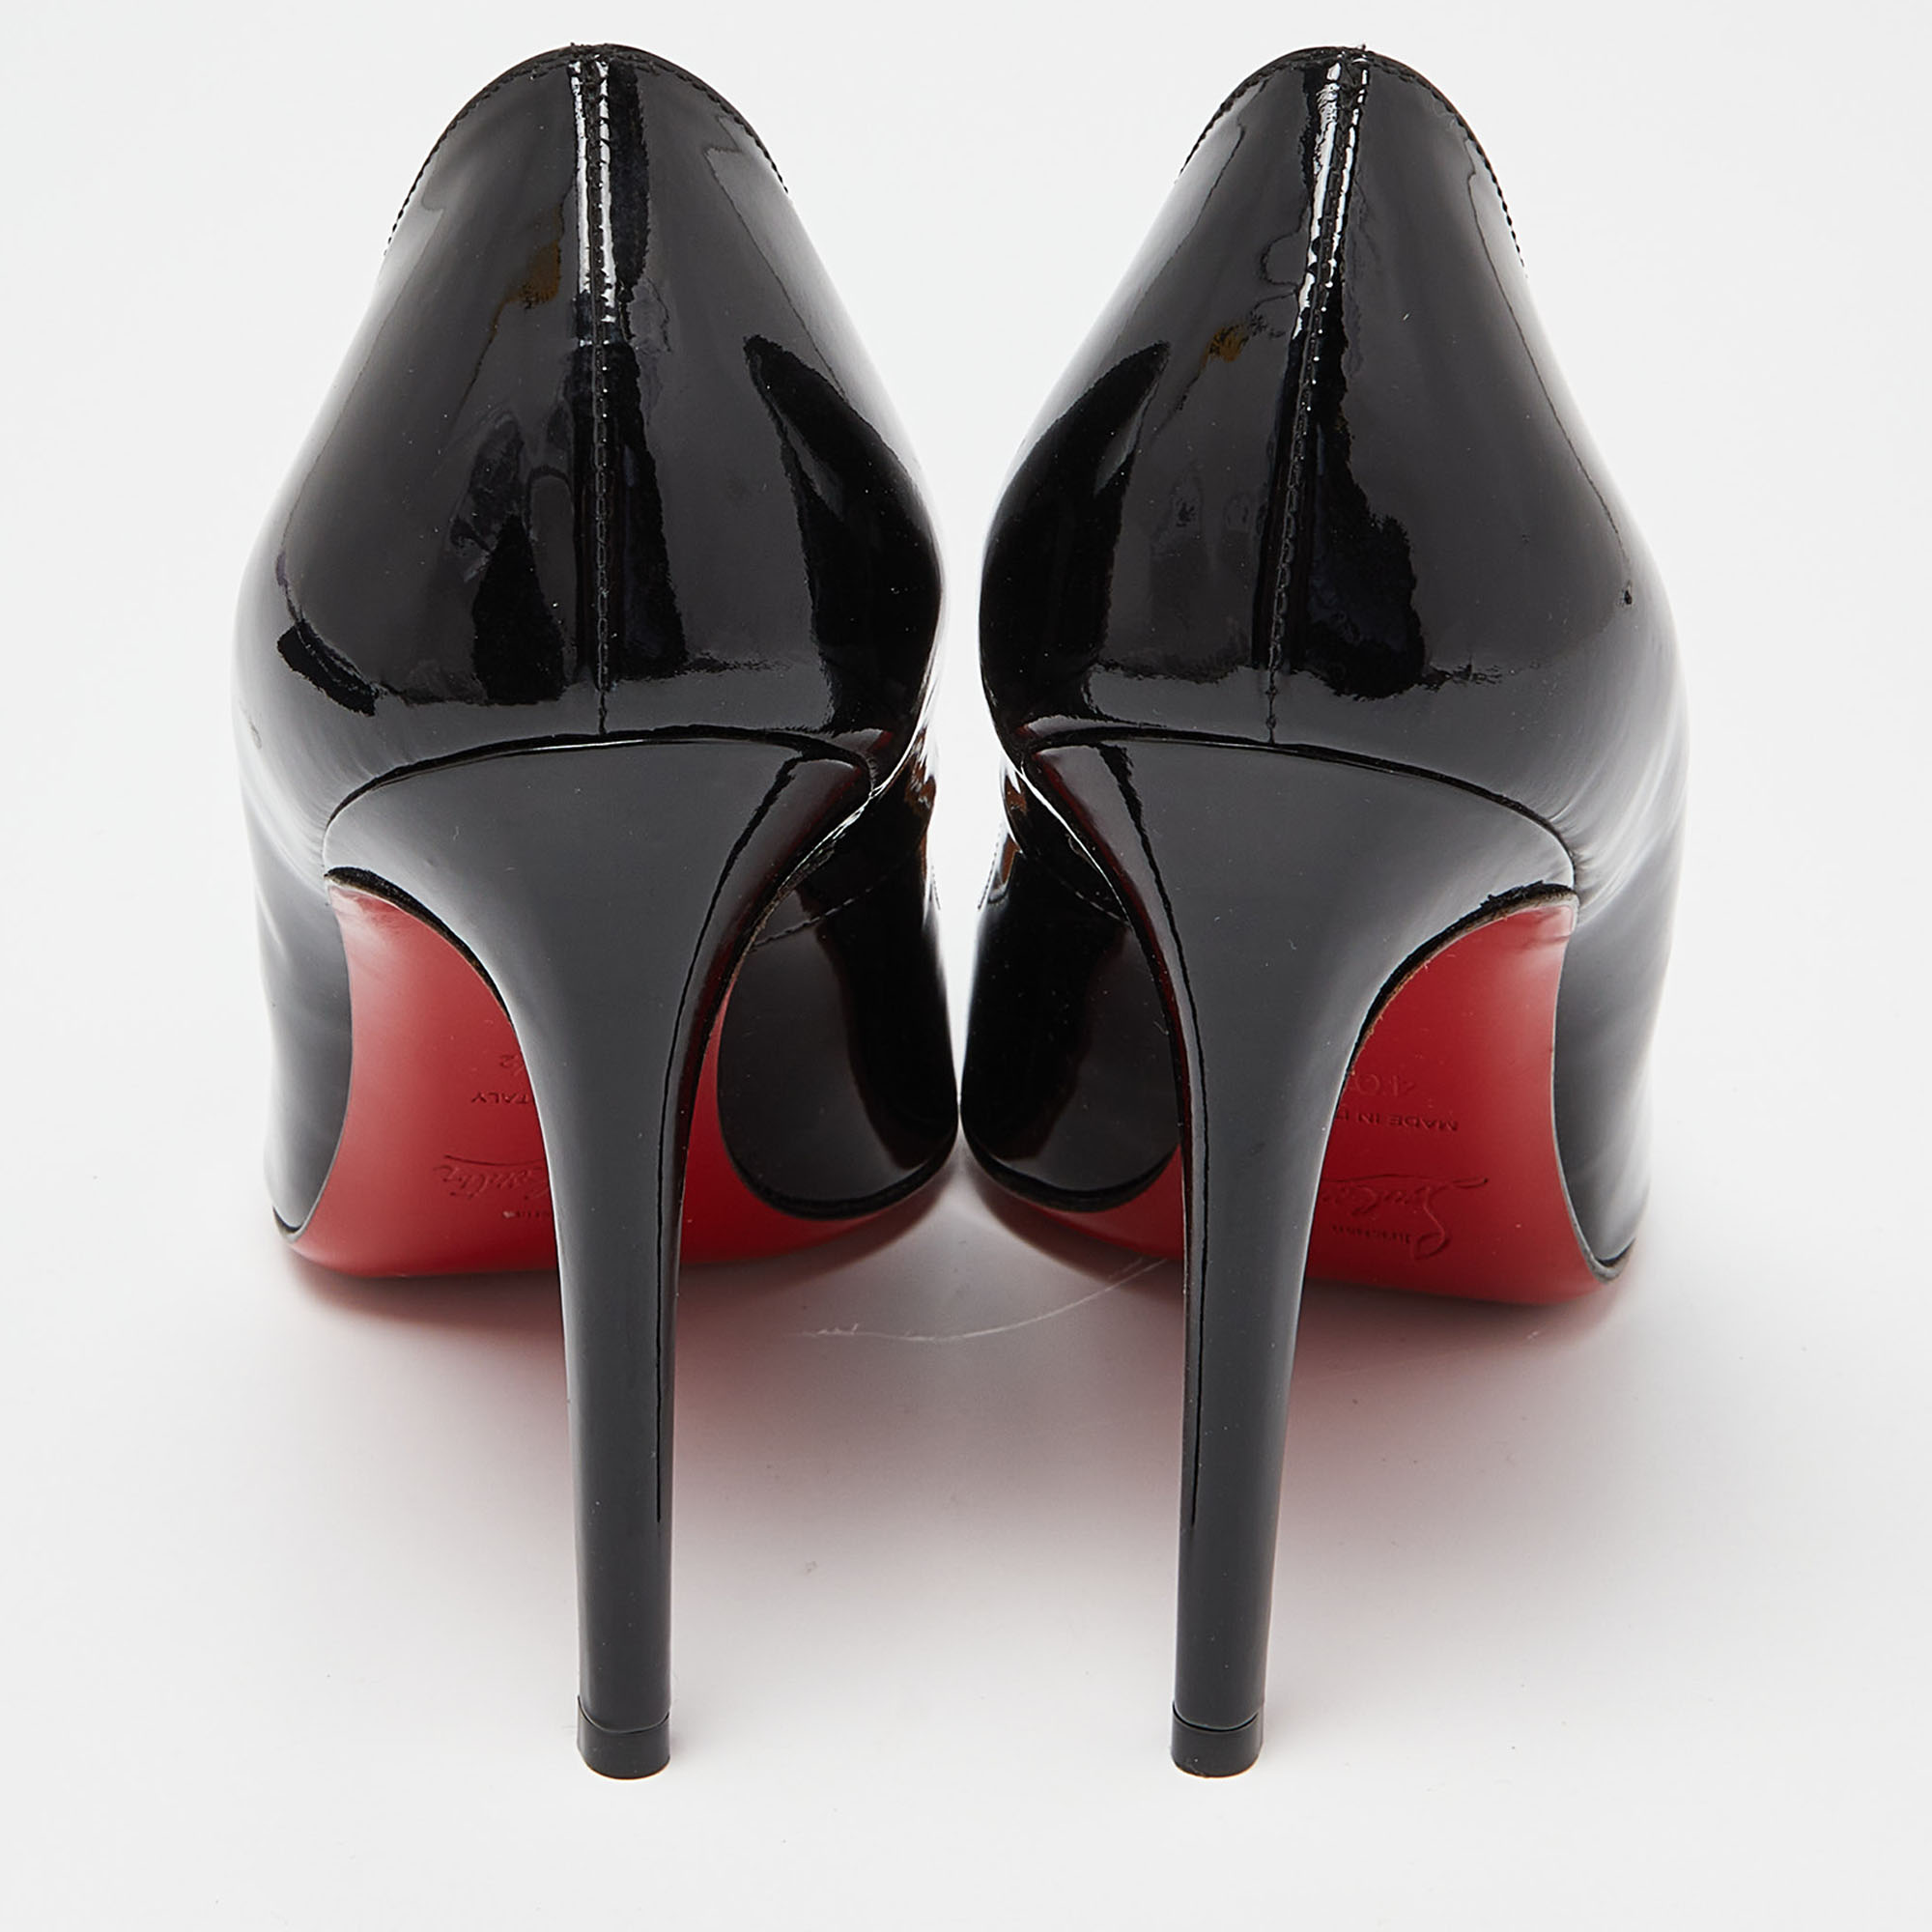 Christian Louboutin Black Patent Leather Pointed Toe Pumps Size 40.5